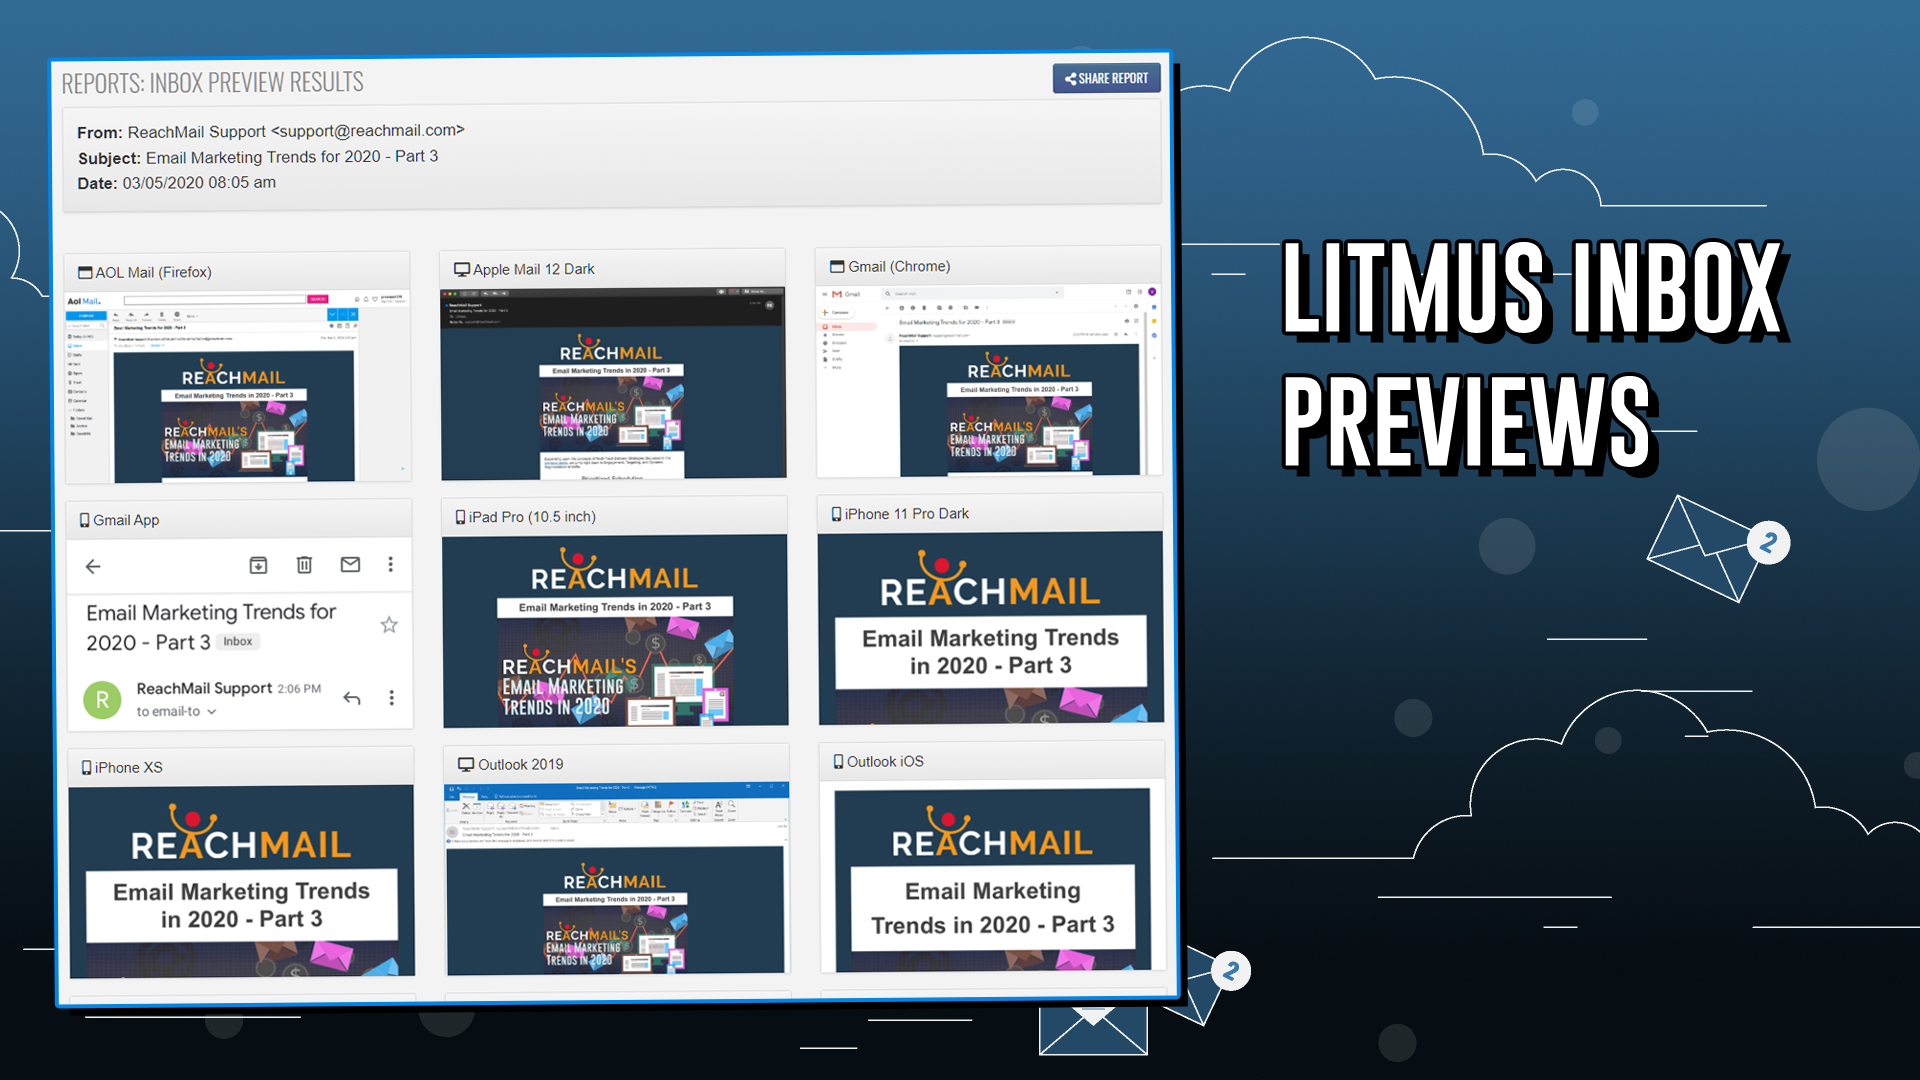 Litmus Inbox Previews Included